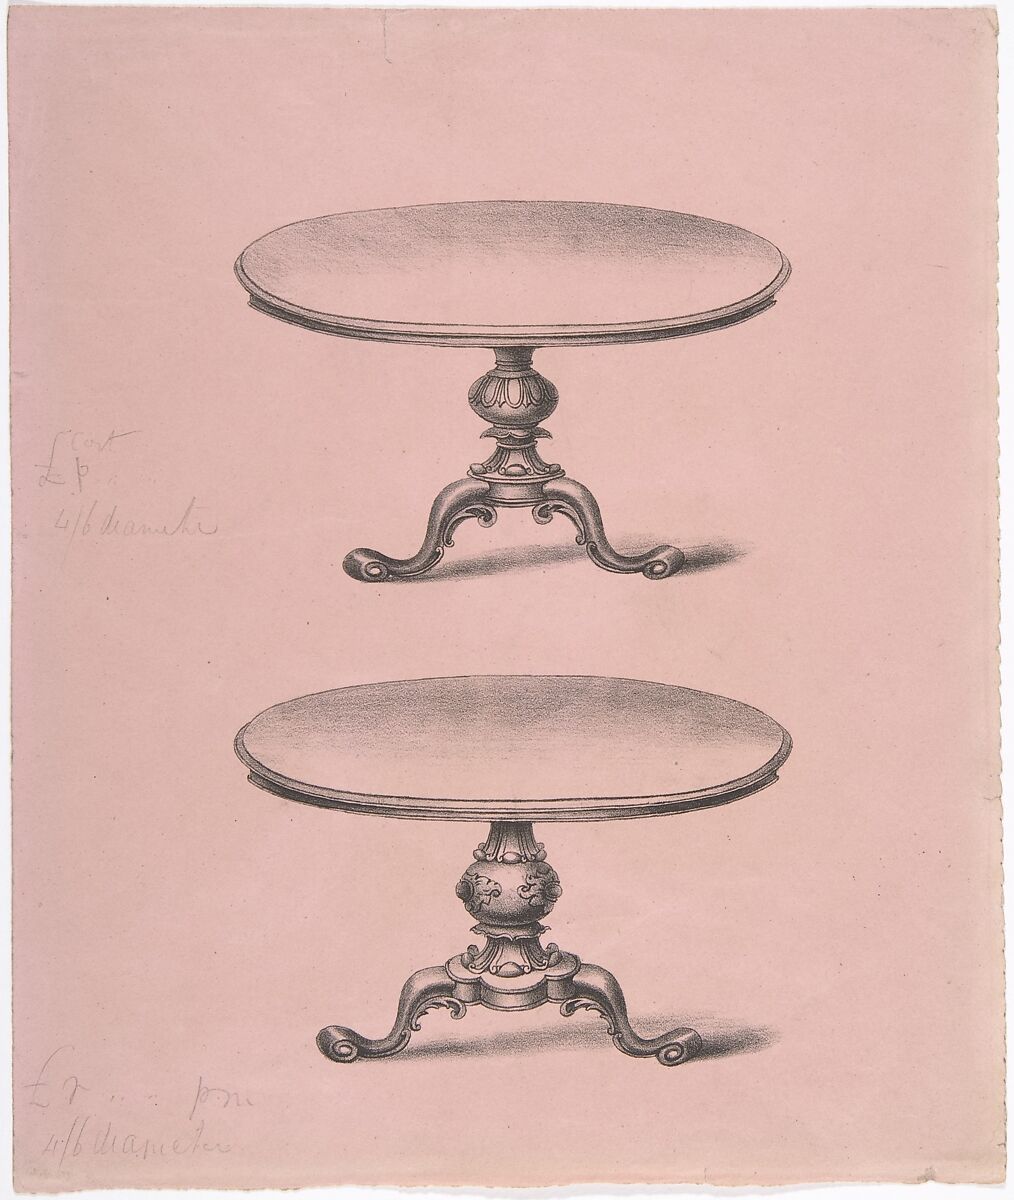 Design for Two Round-topped Pedestal Tables, Anonymous, British, 19th century, Pen and ink on pink paper 